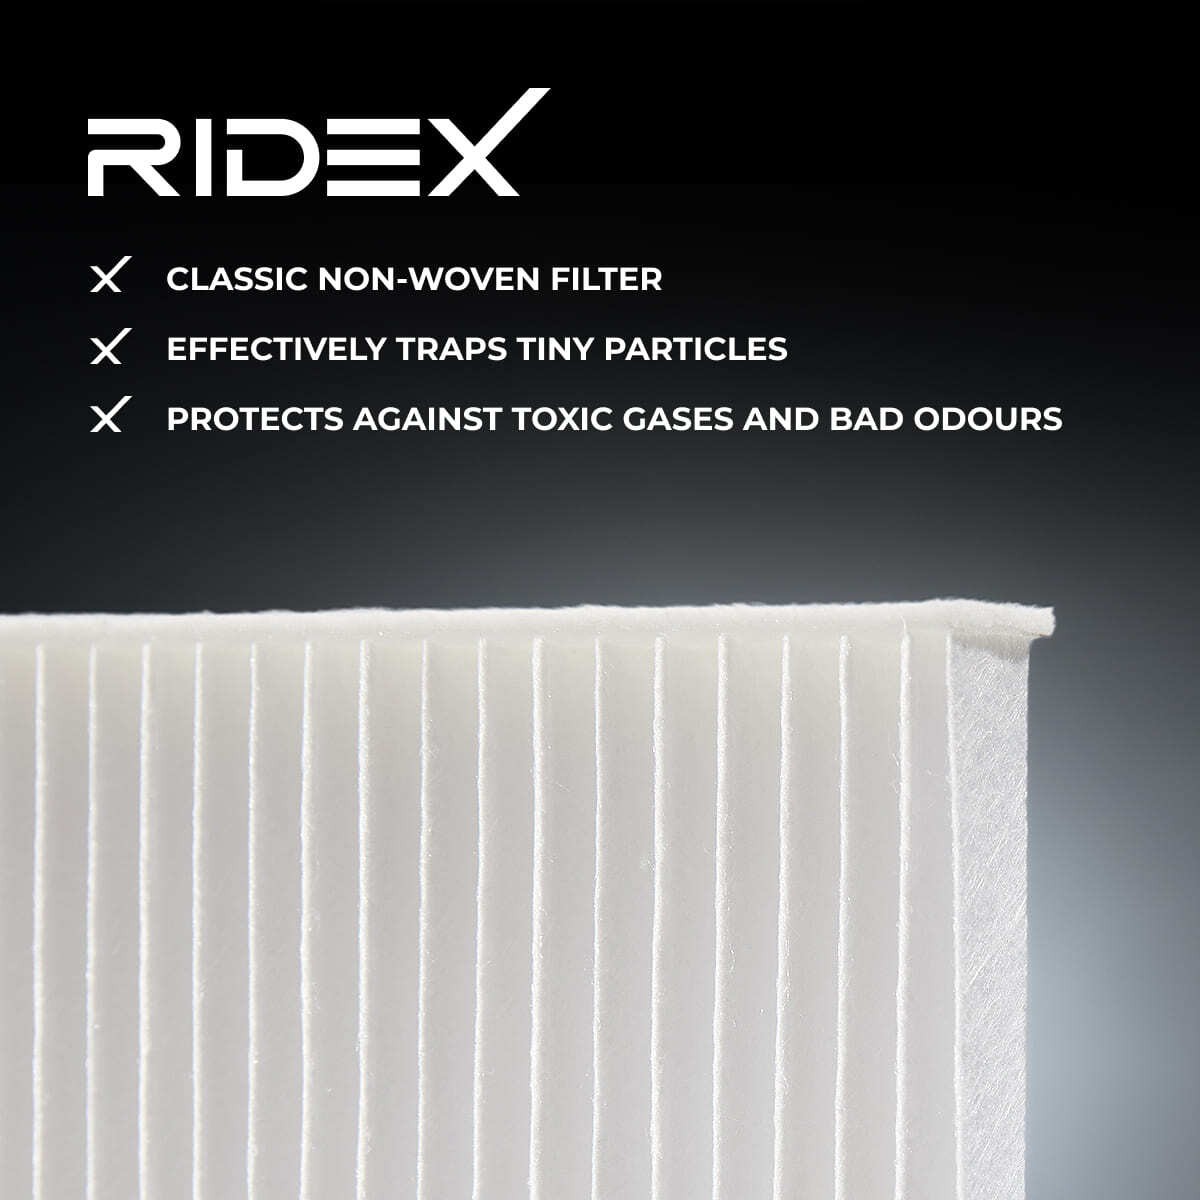 424I0072 Air con filter 424I0072 RIDEX Particulate Filter, 217 mm x 195 mm x 26 mm